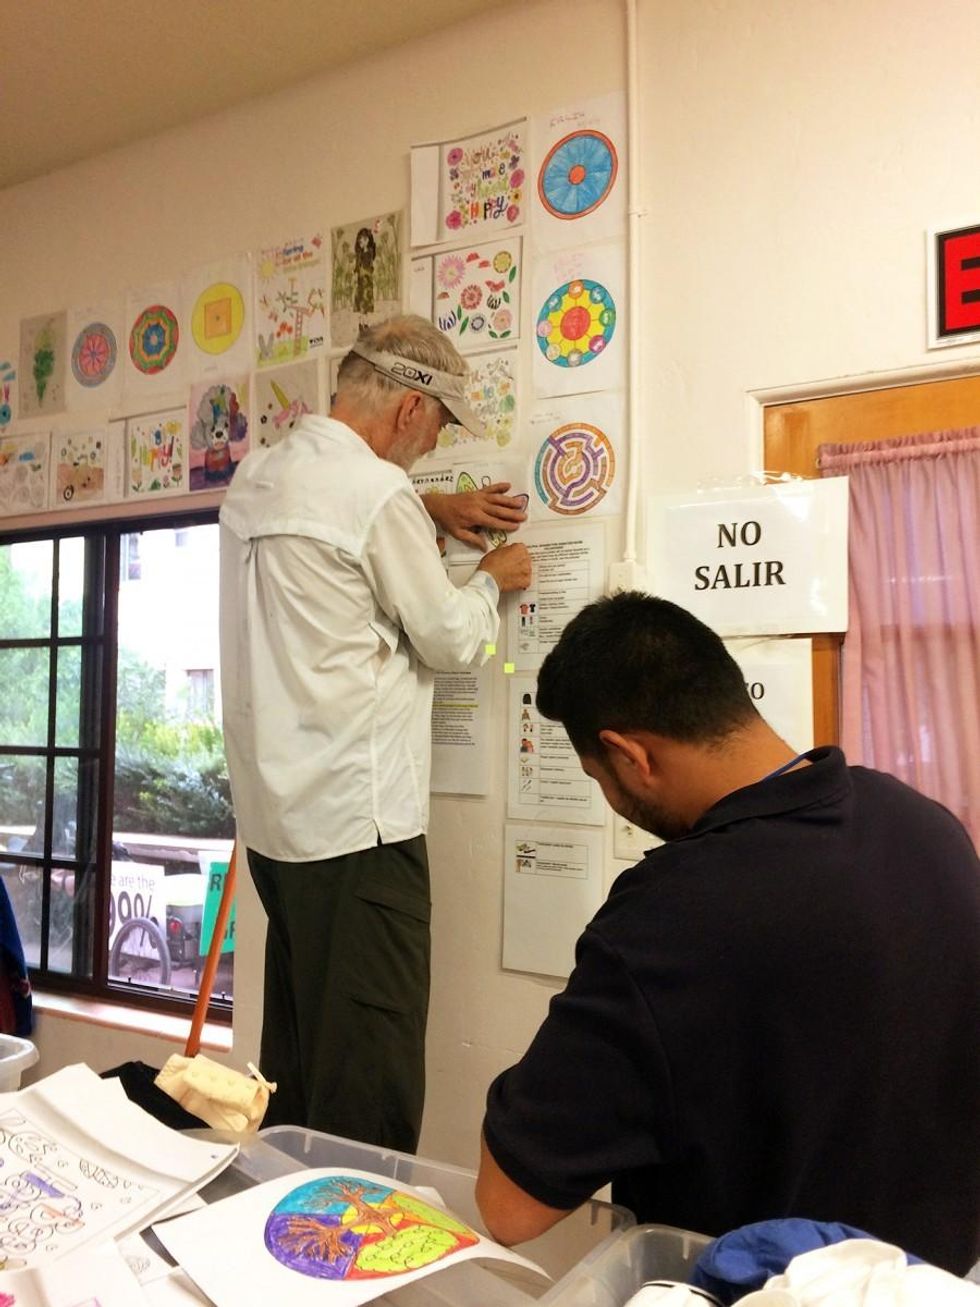 A guest and a local volunteer work to curate a wall of children's drawings in the clothing room. (Photo: Rose Lambert-Sluder)